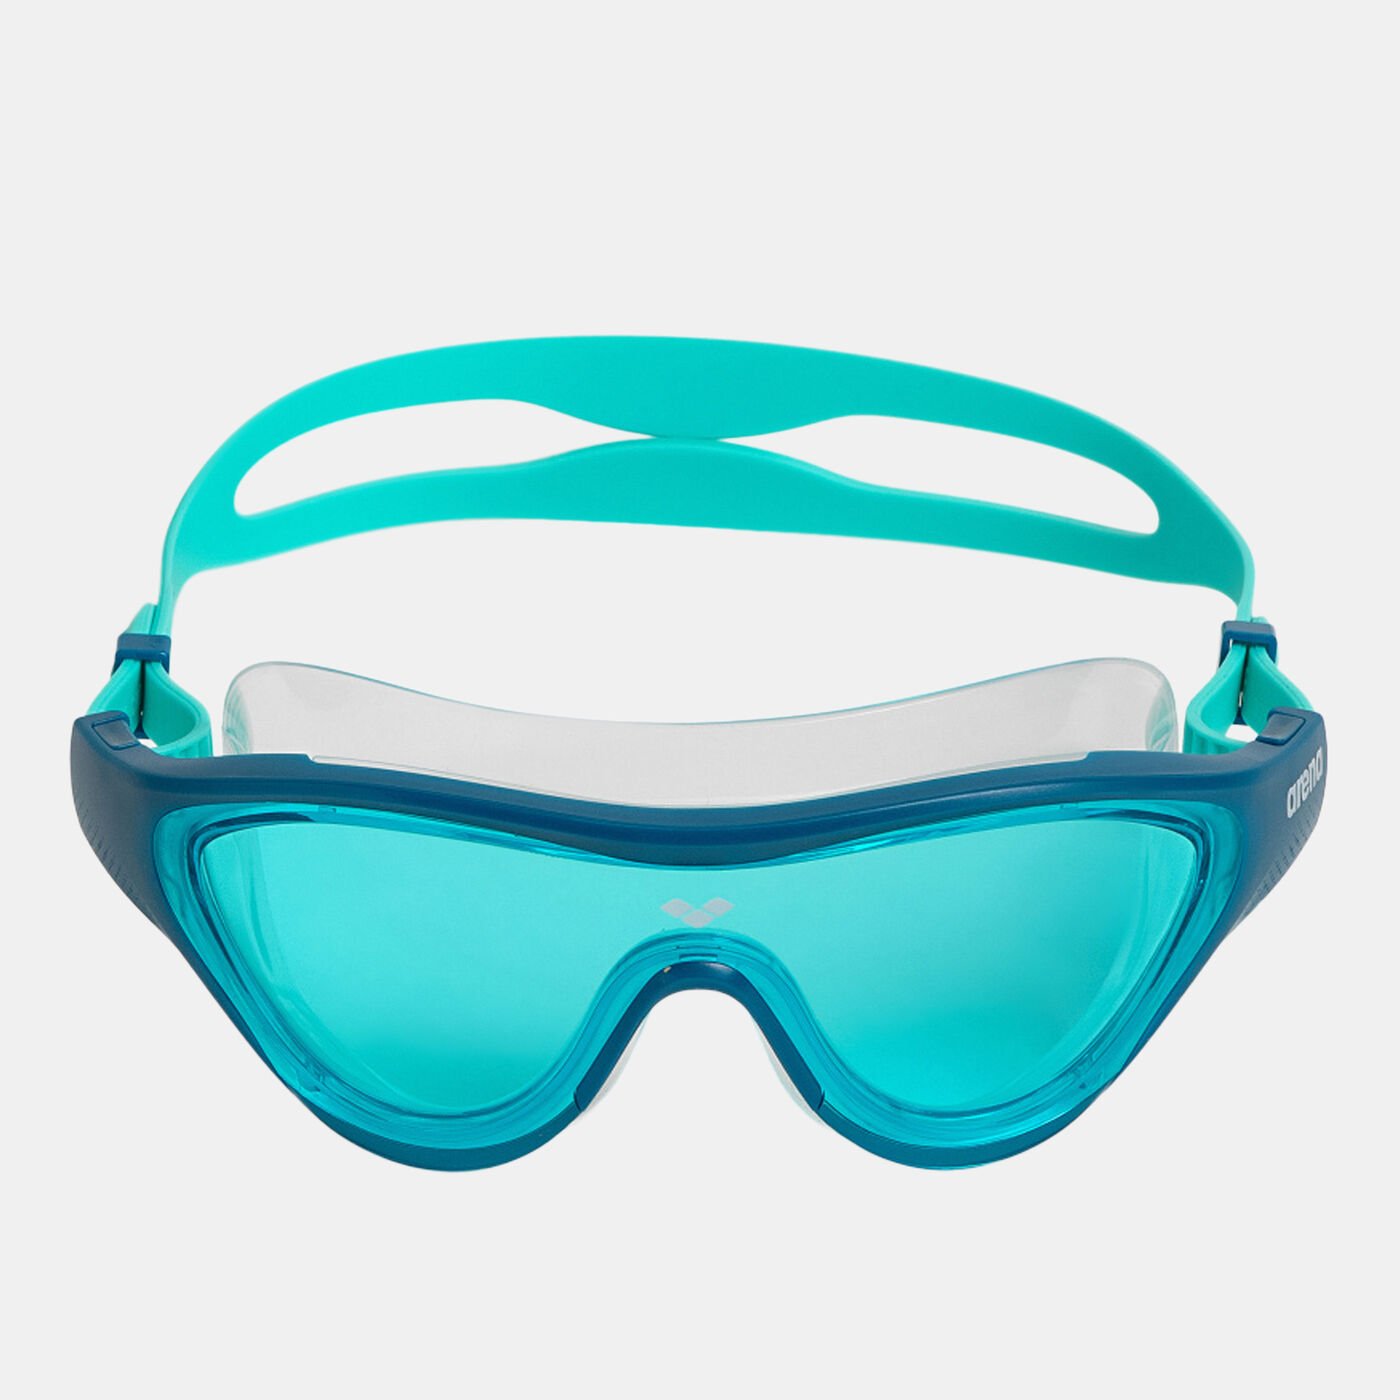 The One Mask Swimming Goggles